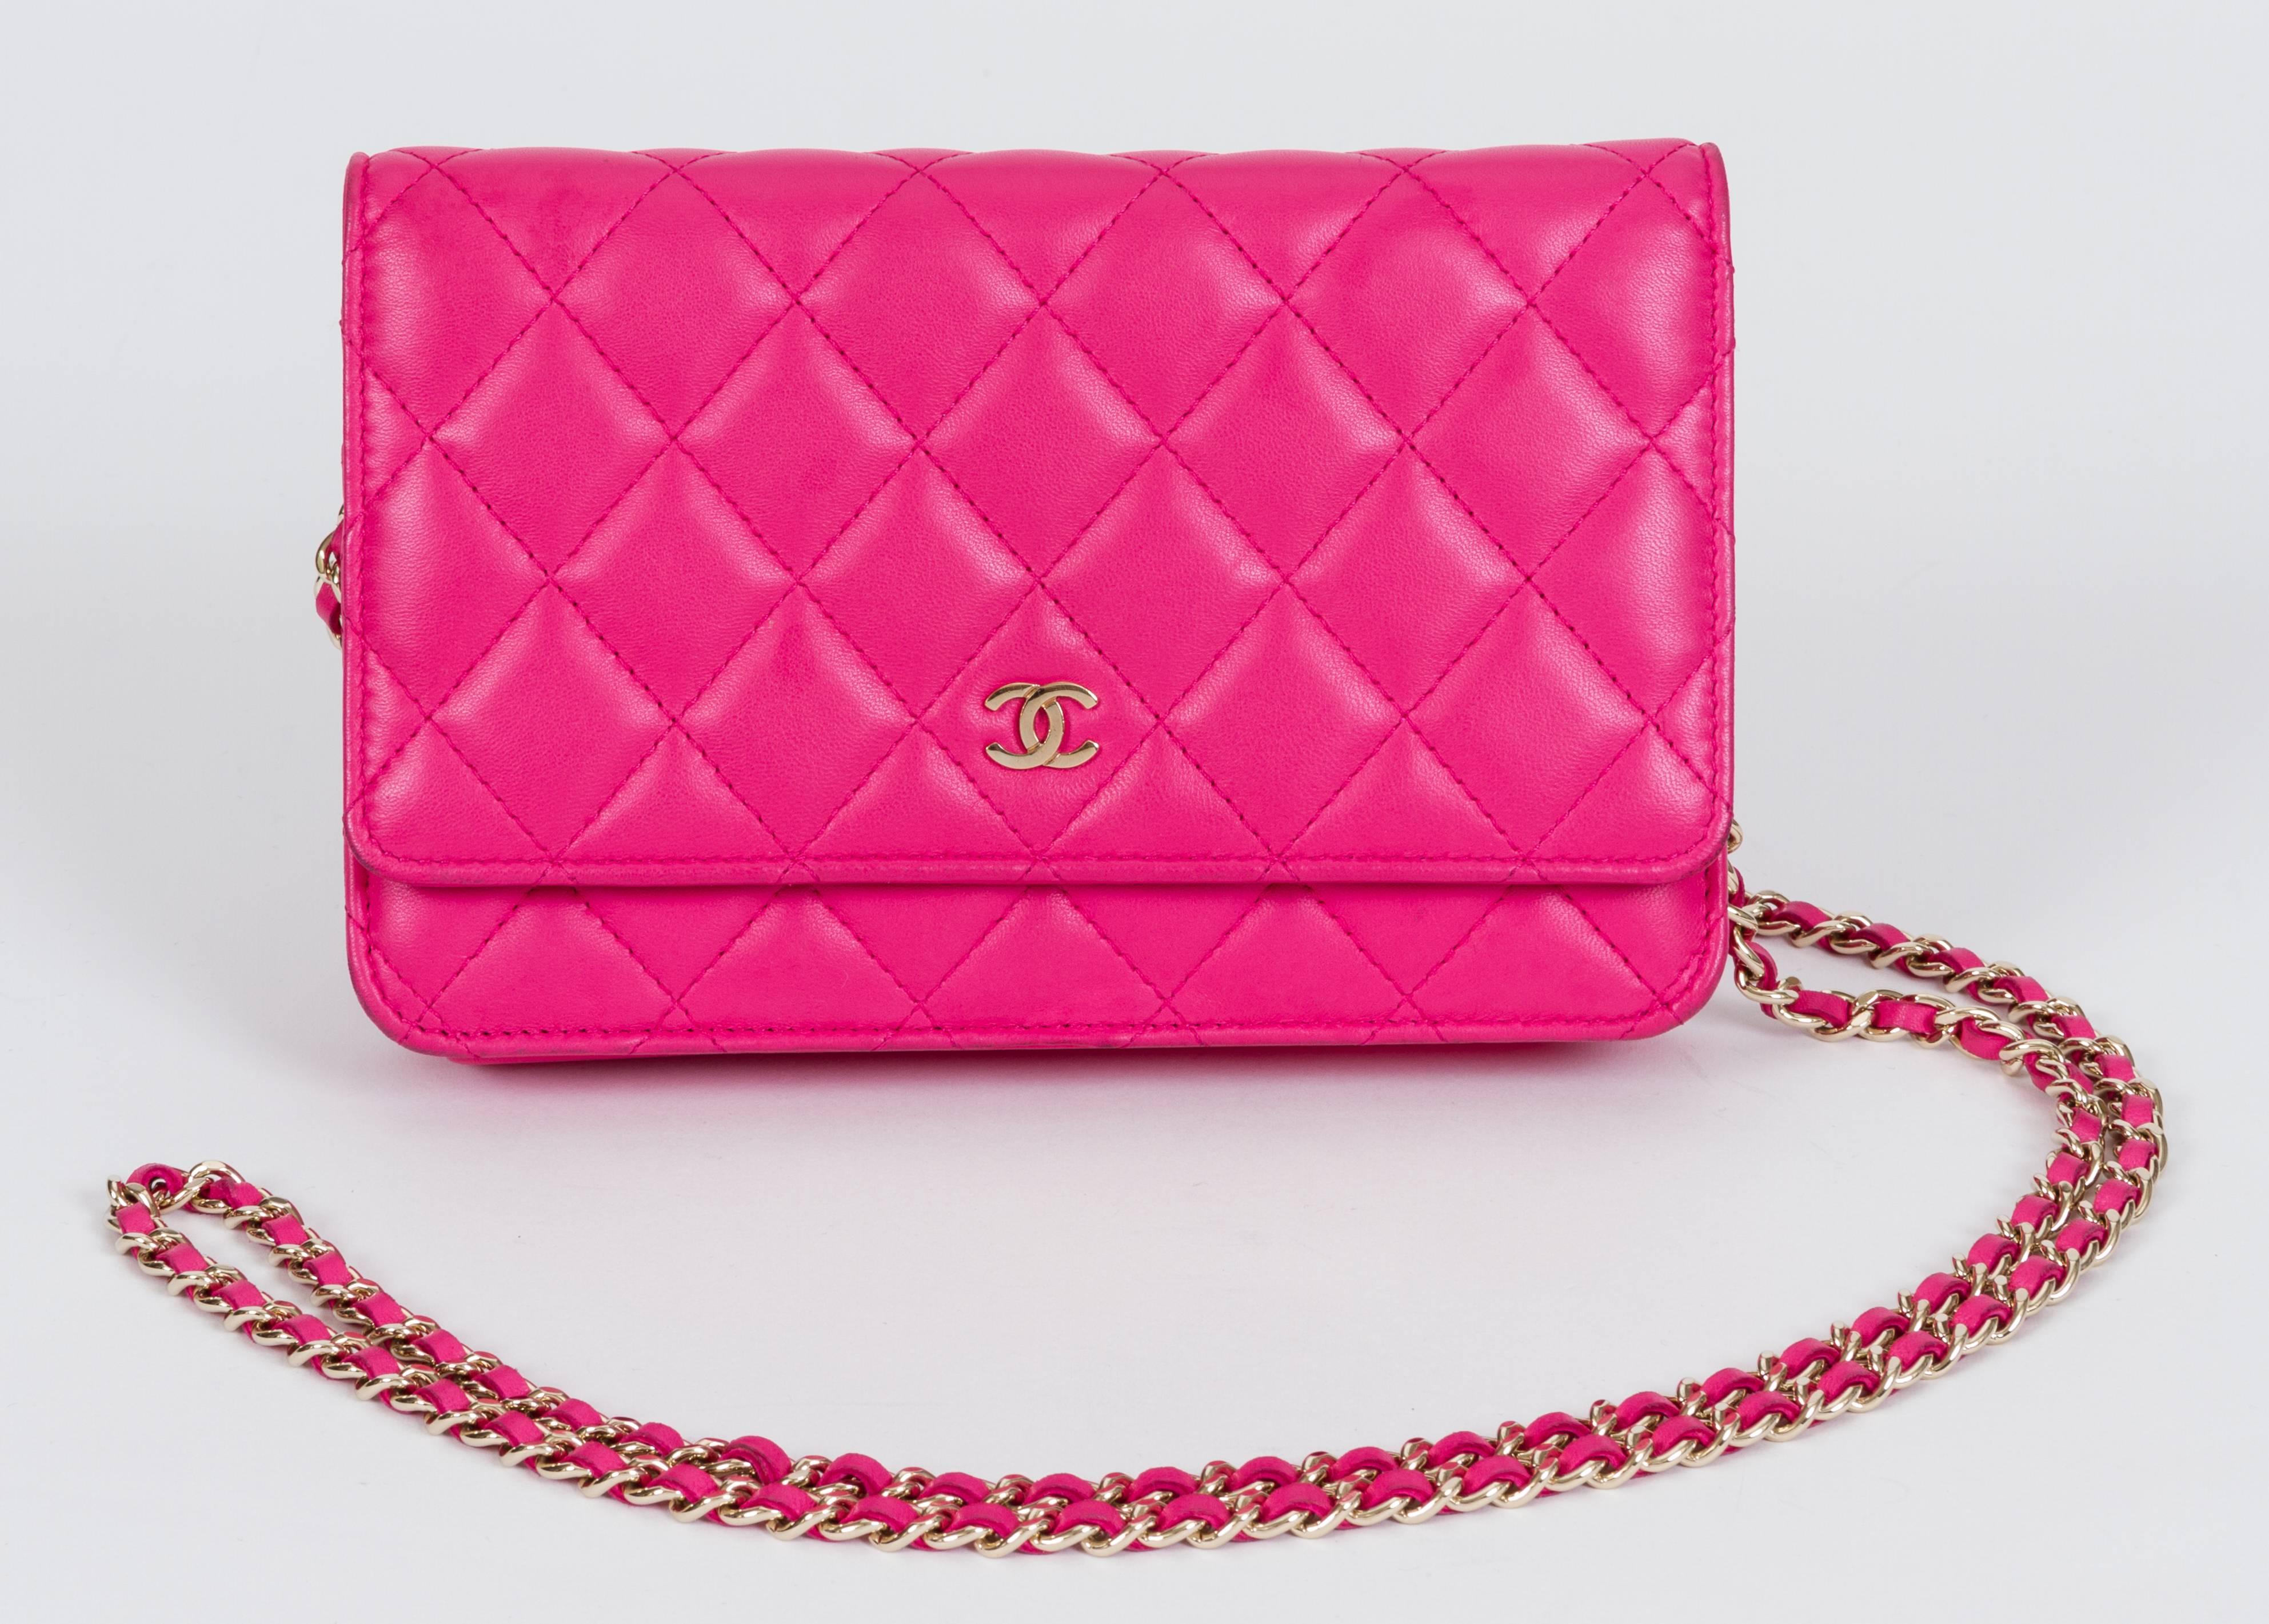 Chanel fuchsia lambskin quilted wallet on a chain with gold tone hardware. Can be worn as a clutch or as a cross body. Mint interior and minor wear on edges as shown in photos. Measurements 7.5